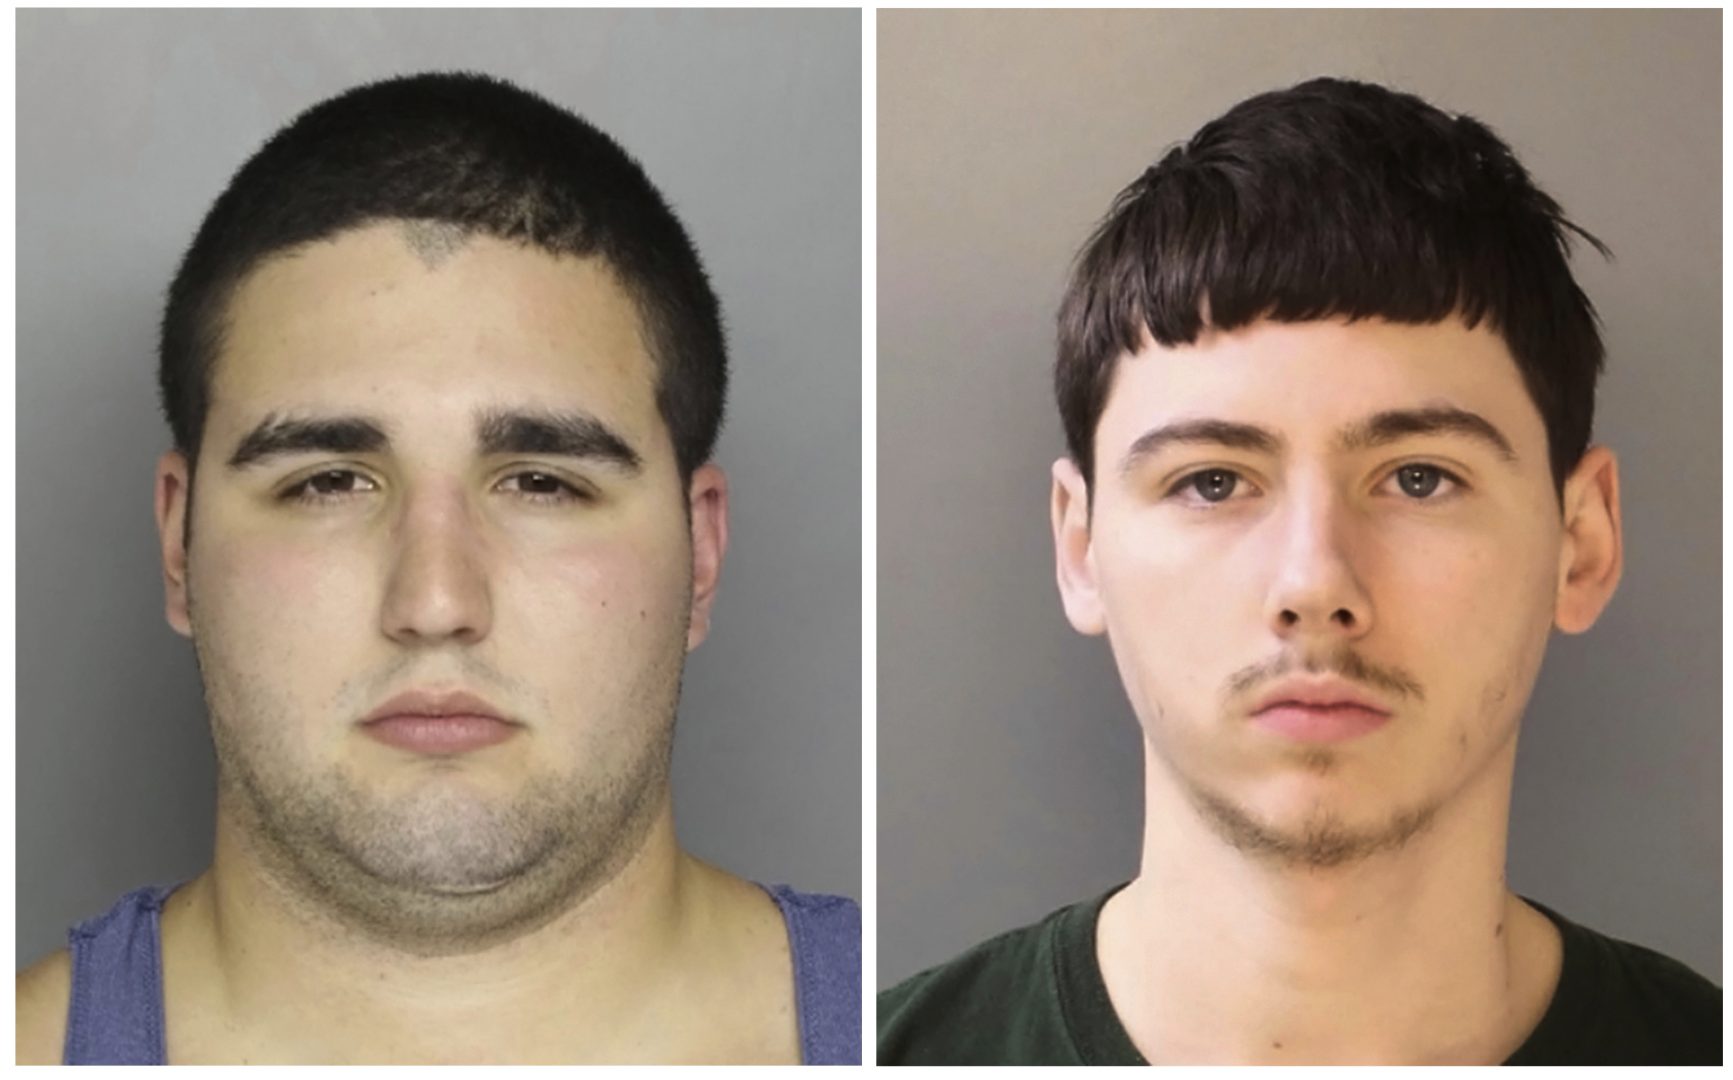 FILE - This combination of file photos provided by the Bucks County District Attorney's Office in Doylestown, Pa., shows Cosmo DiNardo, left, and his cousin shows Sean Kratz. DiNardo has pleaded guilty to murder charges in the gruesome killings of four young men whose bodies were found buried on a suburban Philadelphia. DiNardo faces life in prison under the terms of the deal reached Wednesday, May 16, 2018. His cousin, Kratz, is expected to plead guilty to charges related to his involvement in the deaths of the men, ages 19-22, last July. 